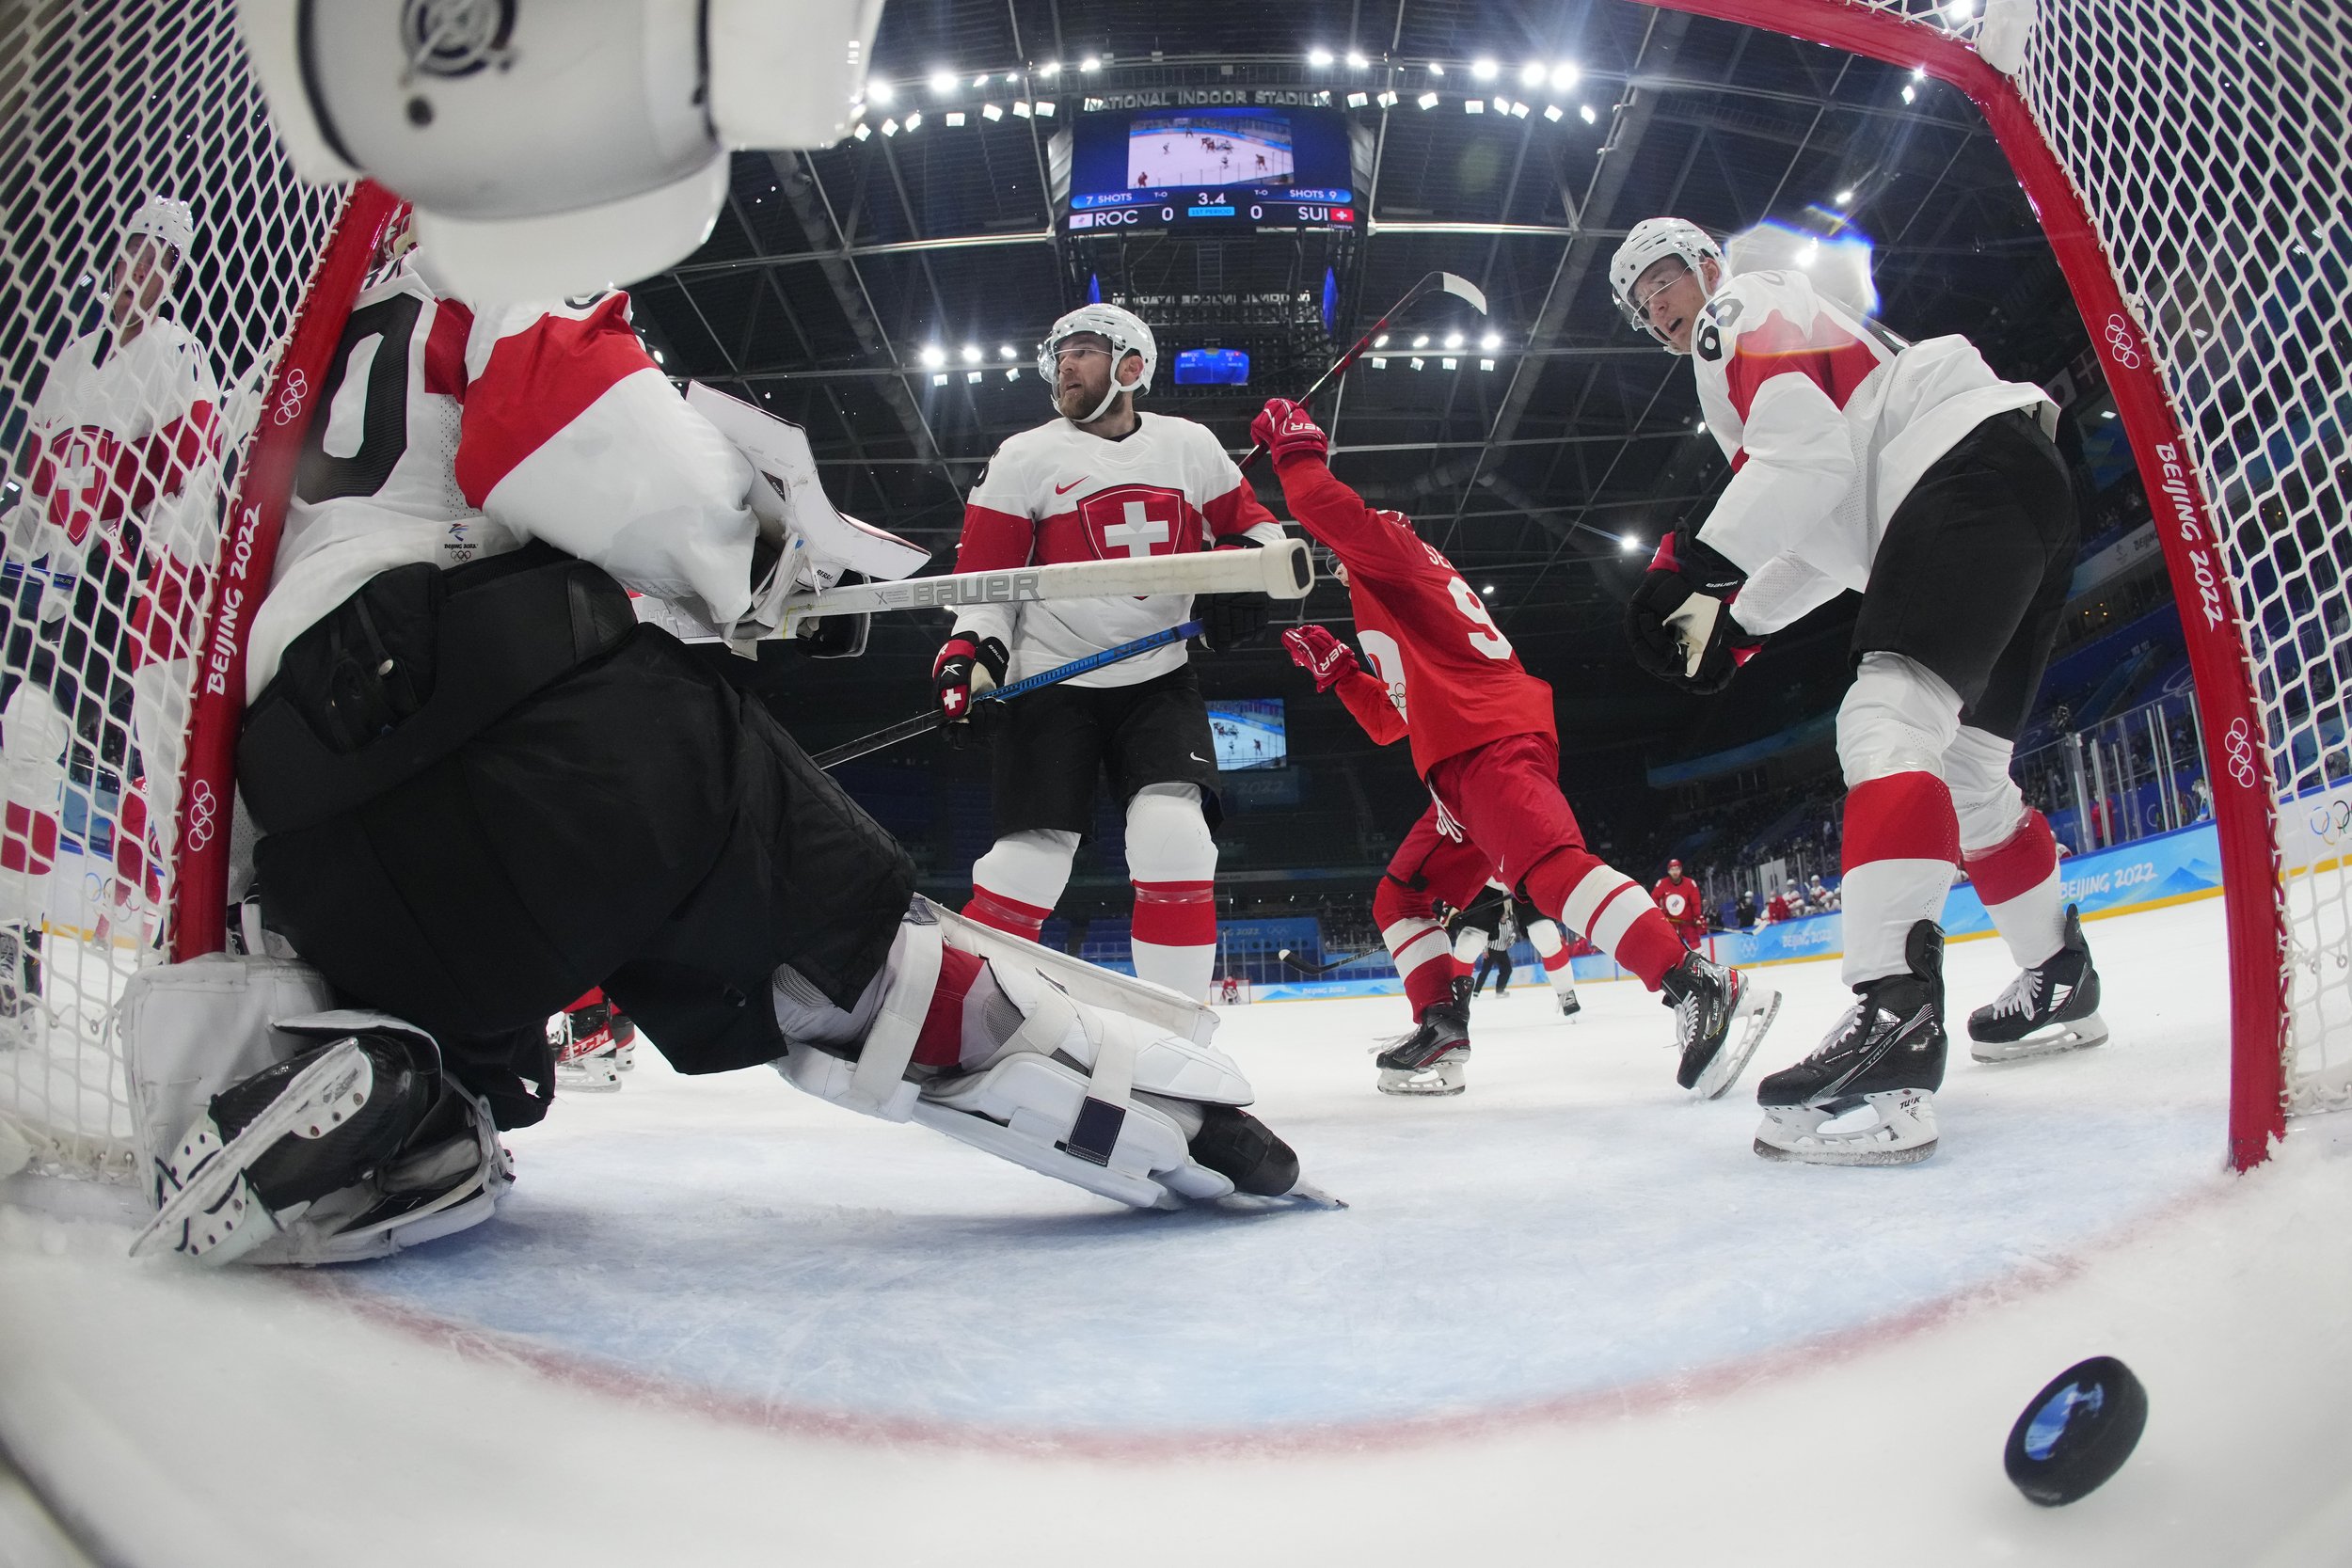  Russian Olympic Committee's Kirill Semyonov (94), second from right, celebrates after a shot by teammate Anton Slepyshev, not shown, gets past Switzerland's goalkeeper Reto Berra (20) for a goal during a preliminary round men's hockey game at the 20